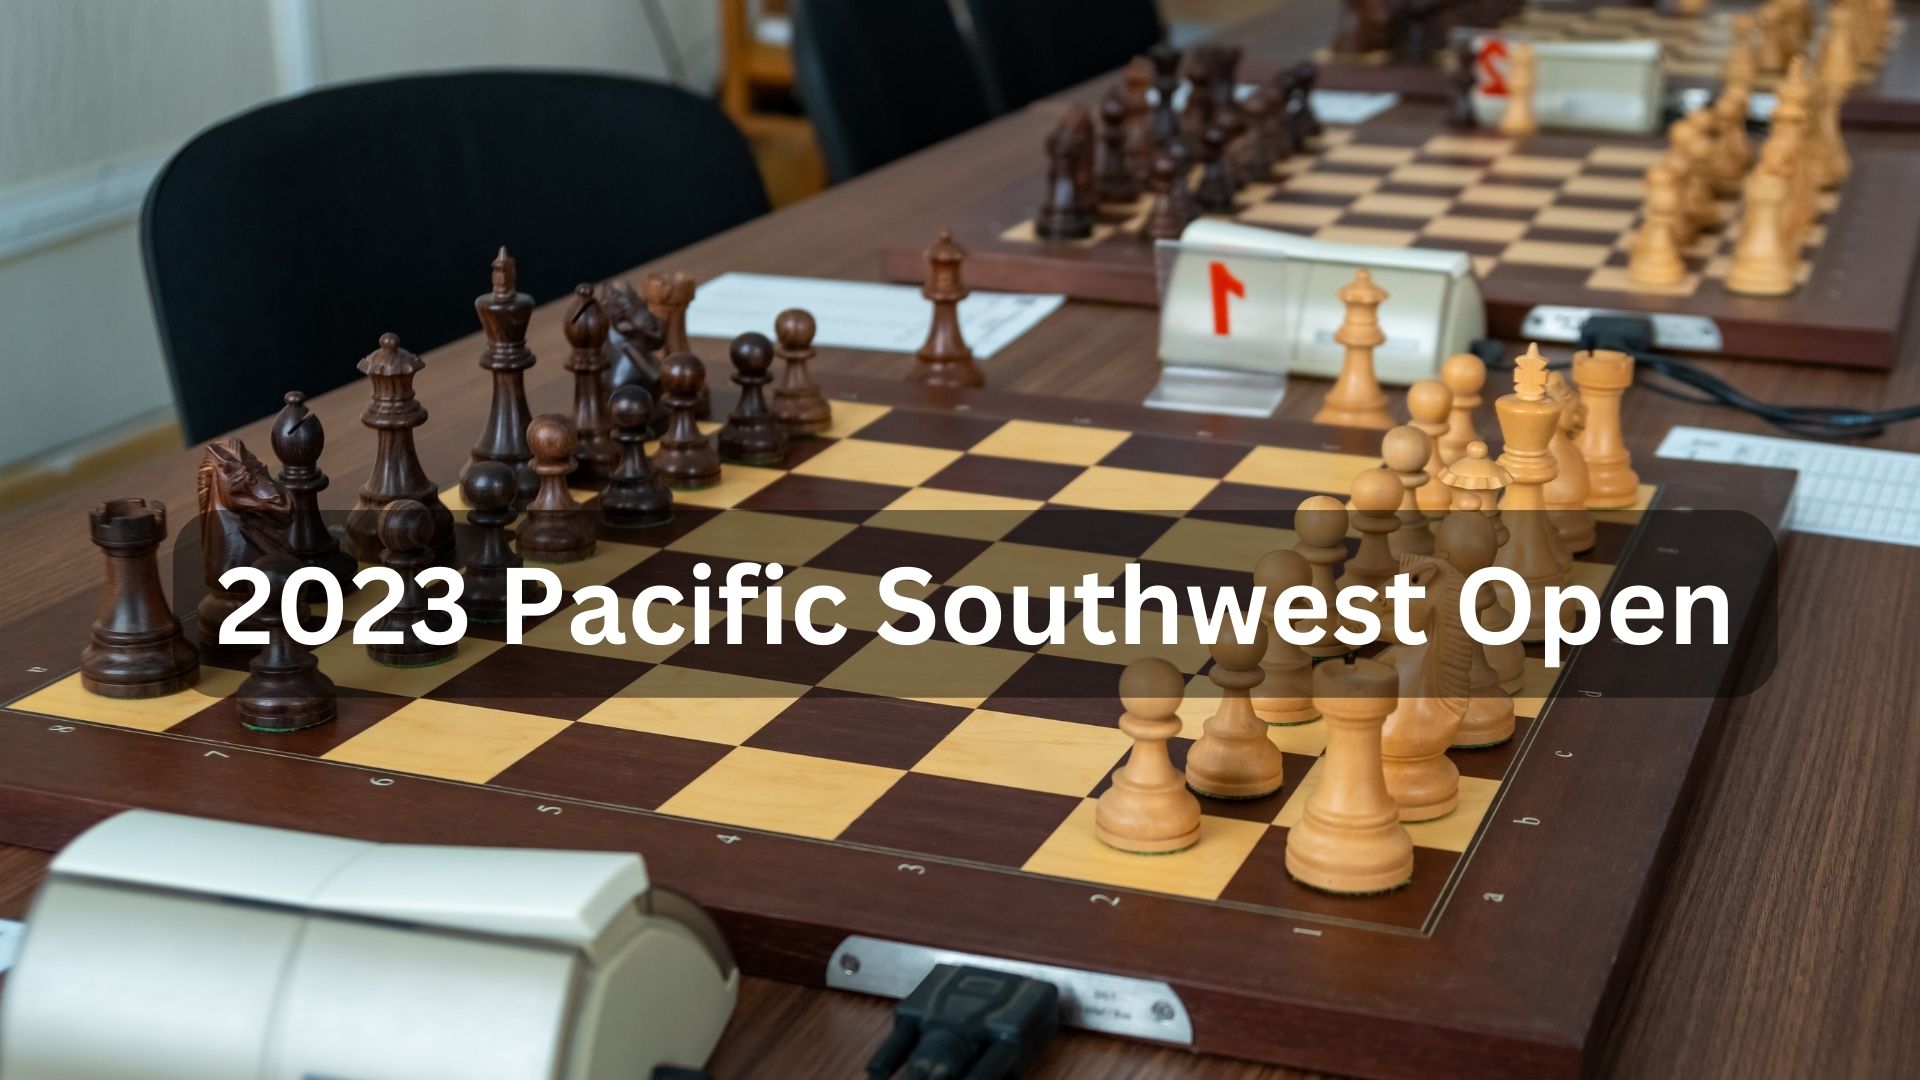 Unexpectedly Rising Above Mediocrity in the 2023 Pacific Southwest Open